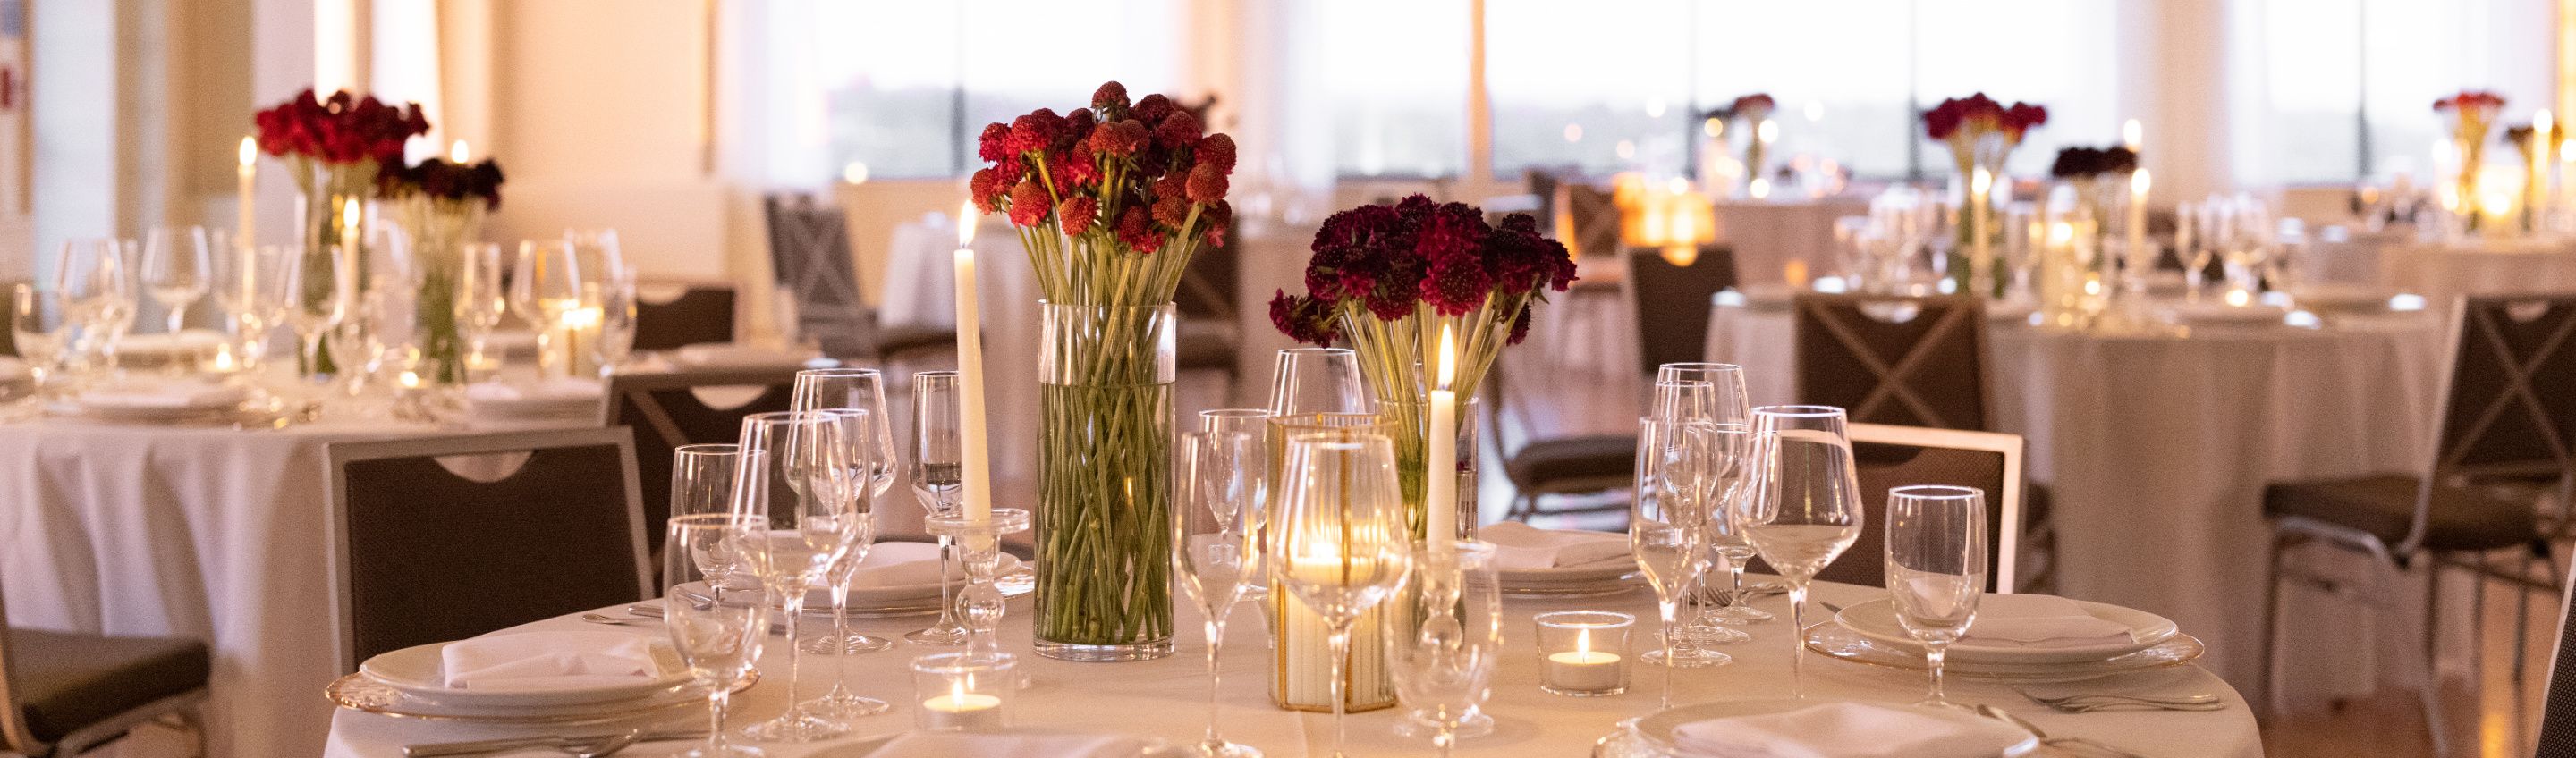 round tables, white tablecloths with stemware and centerpieces with red flowers and candles